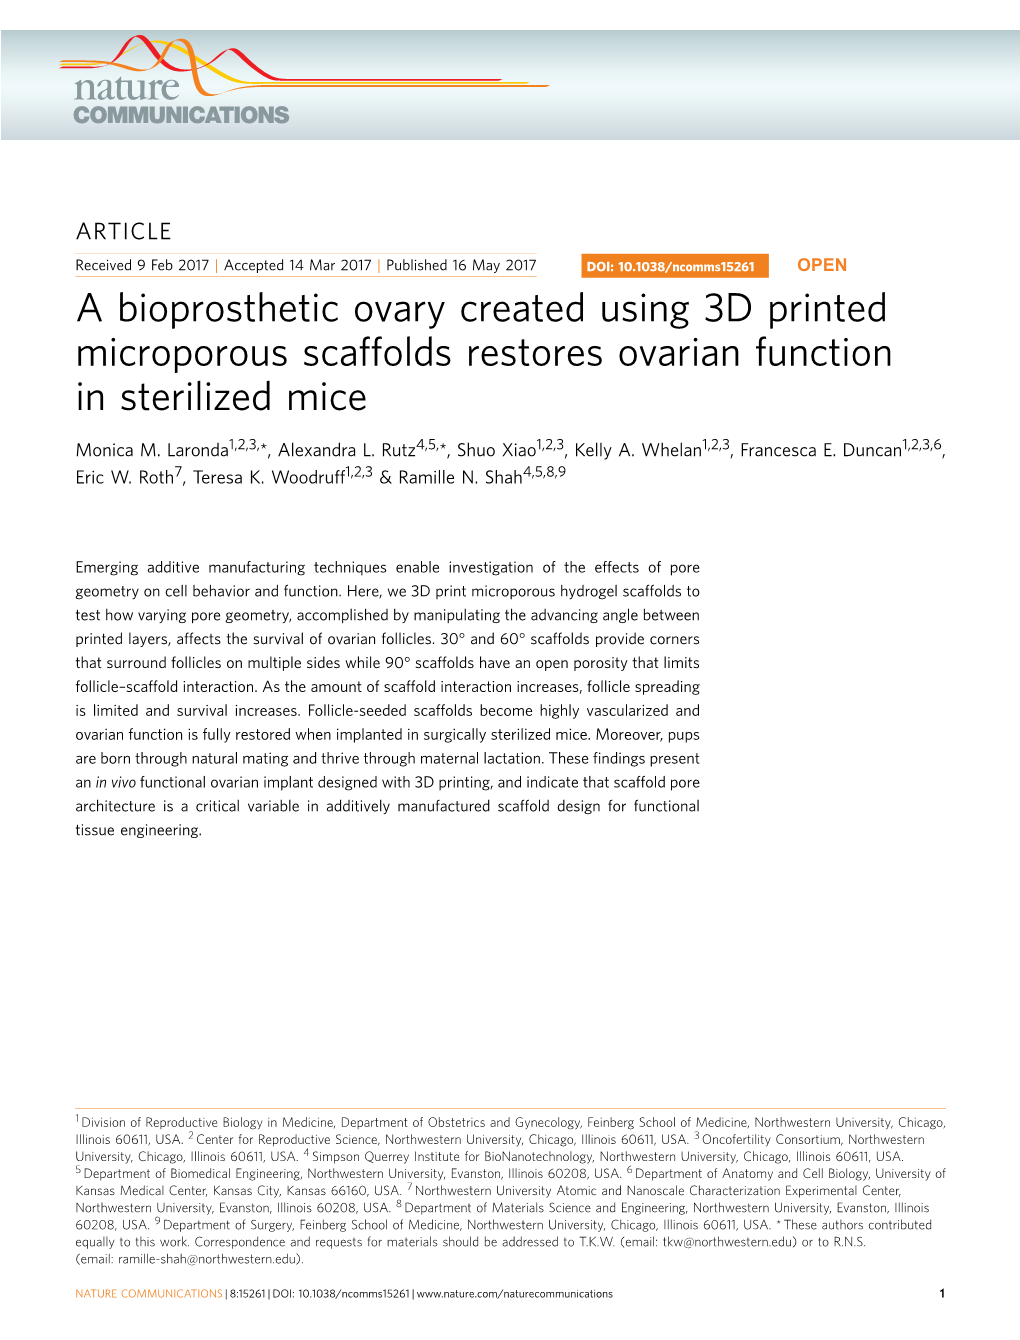 A Bioprosthetic Ovary Created Using 3D Printed Microporous Scaffolds Restores Ovarian Function in Sterilized Mice